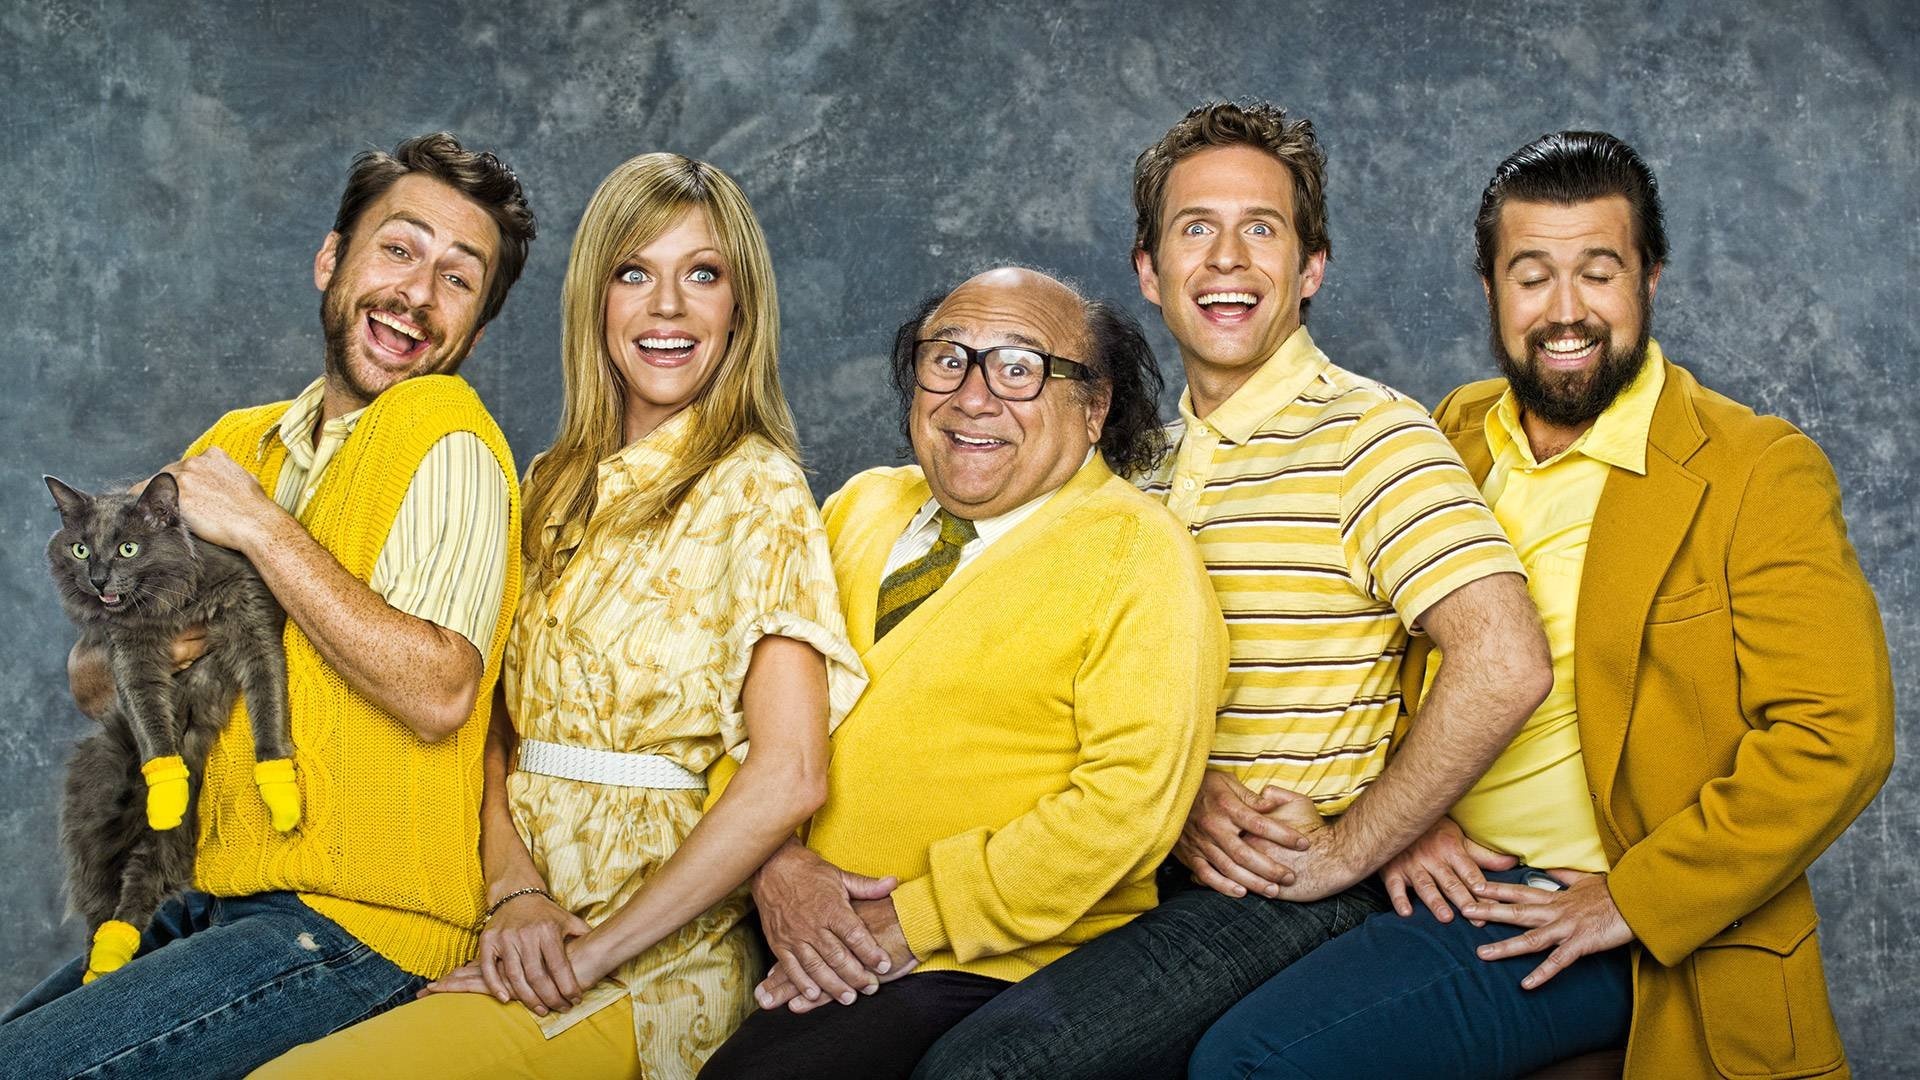 It's Always Sunny in Philadelphia (TV Series): The gang, 5 raging alcoholic, narcissists run a failing dive bar. 1920x1080 Full HD Background.